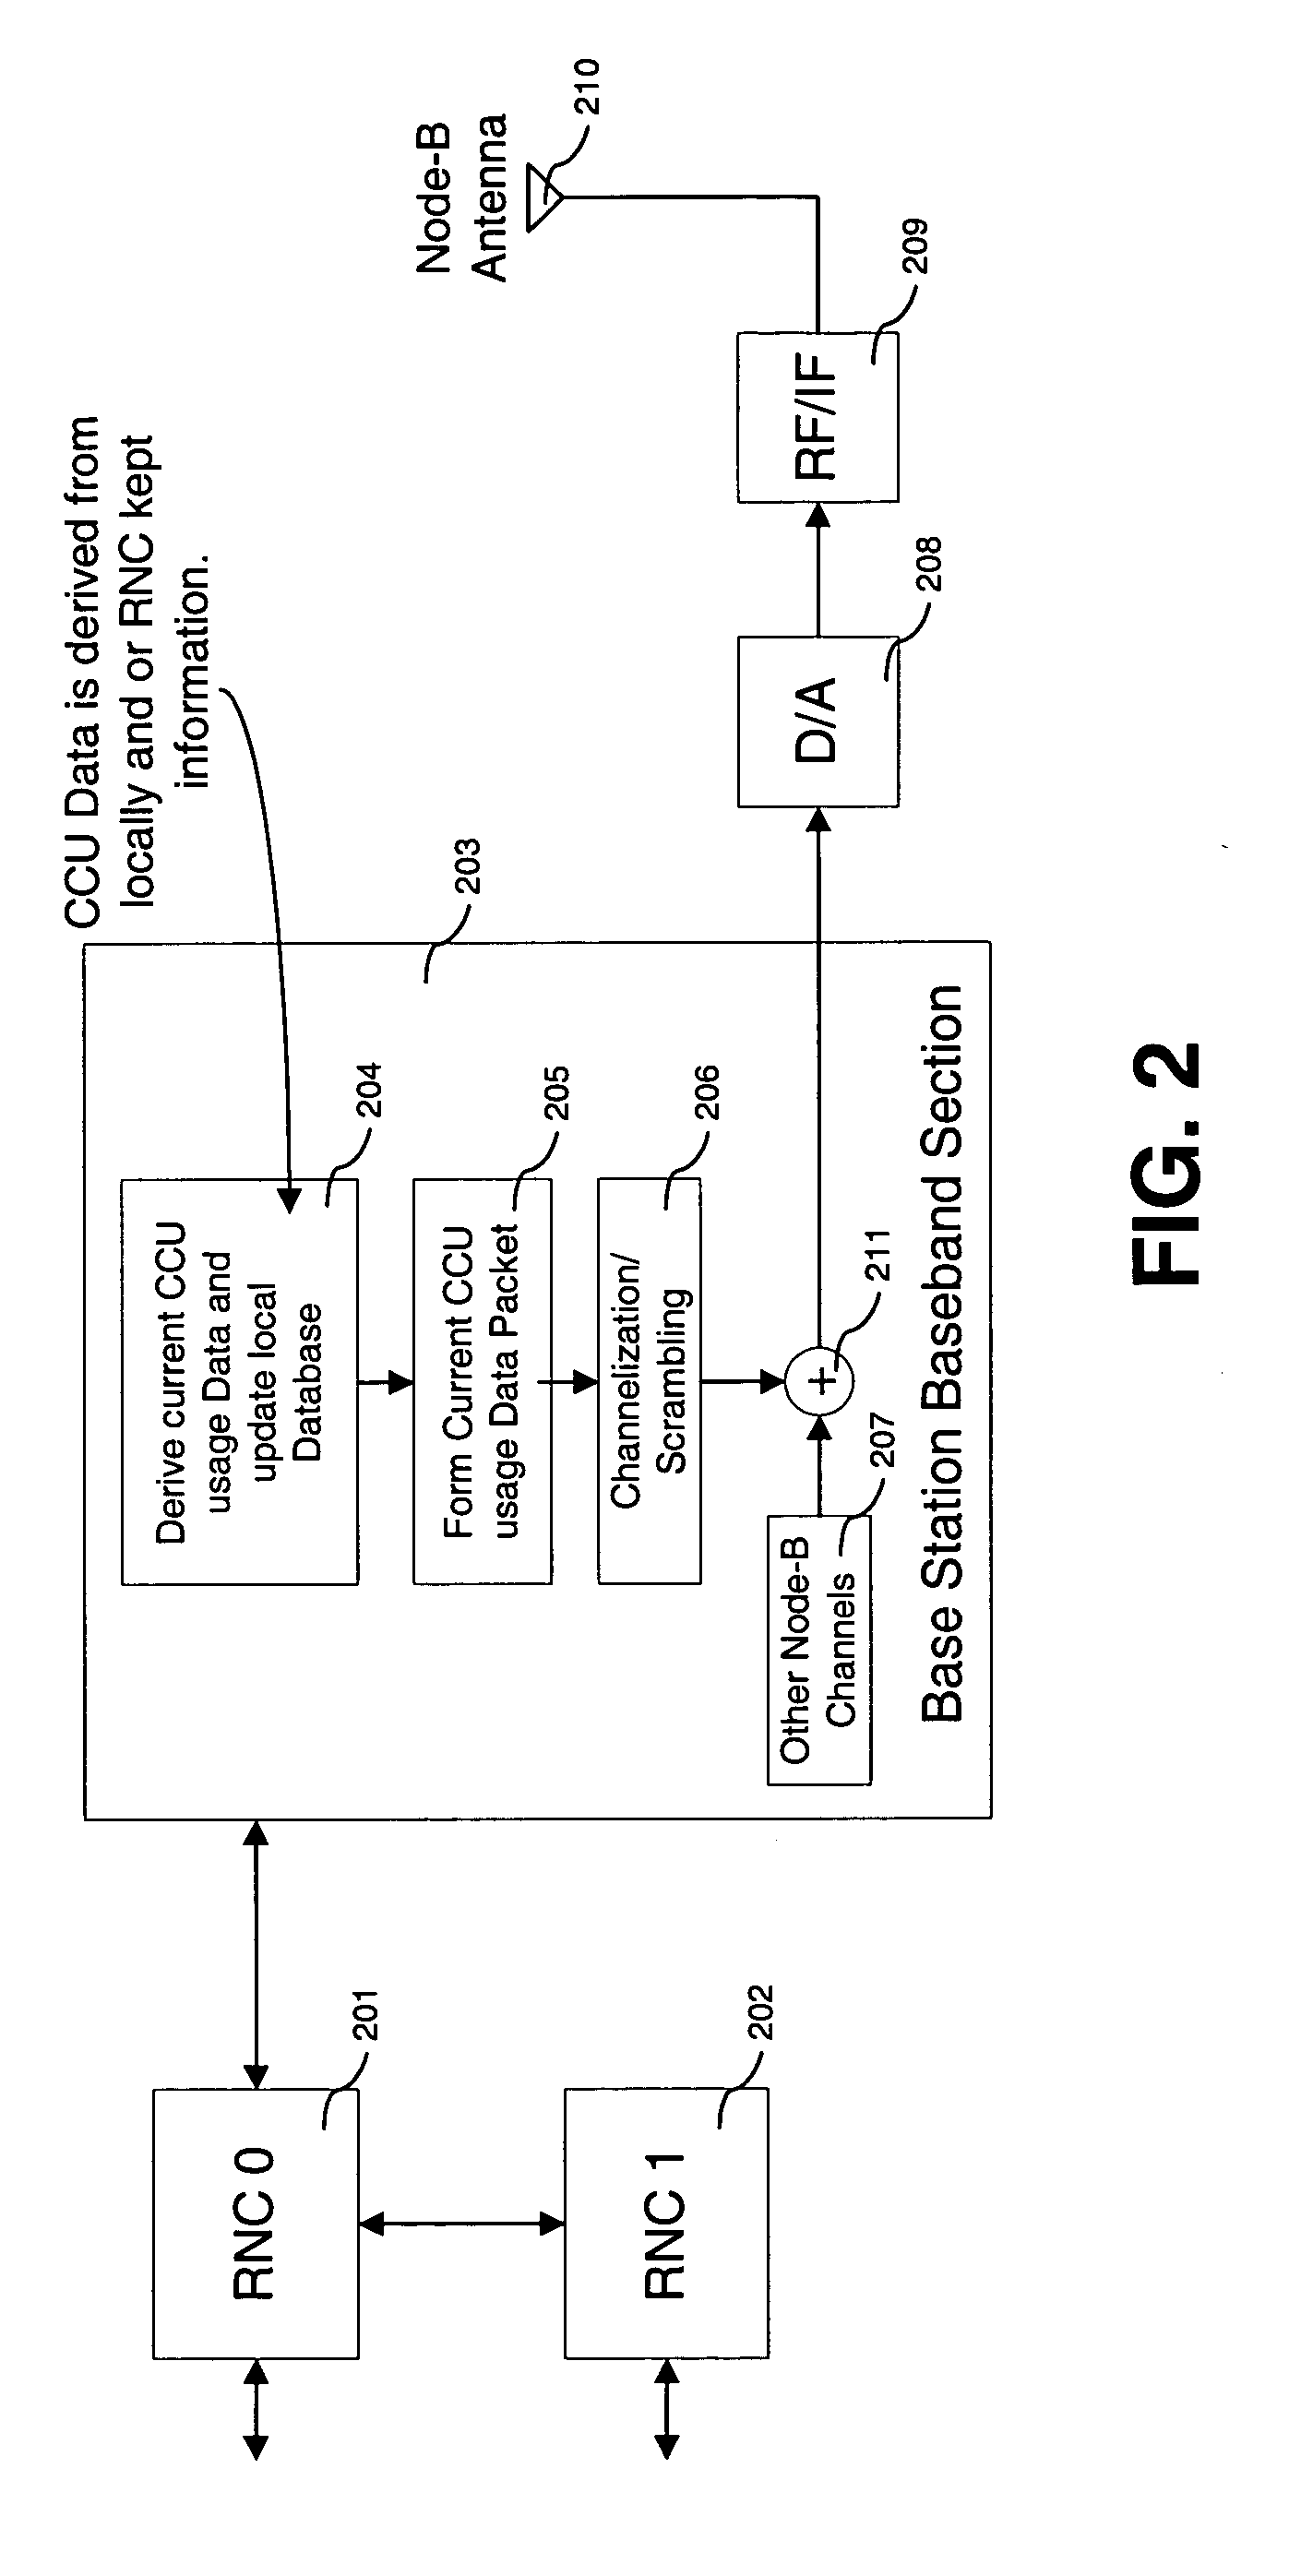 Interference cancellation method and apparatus